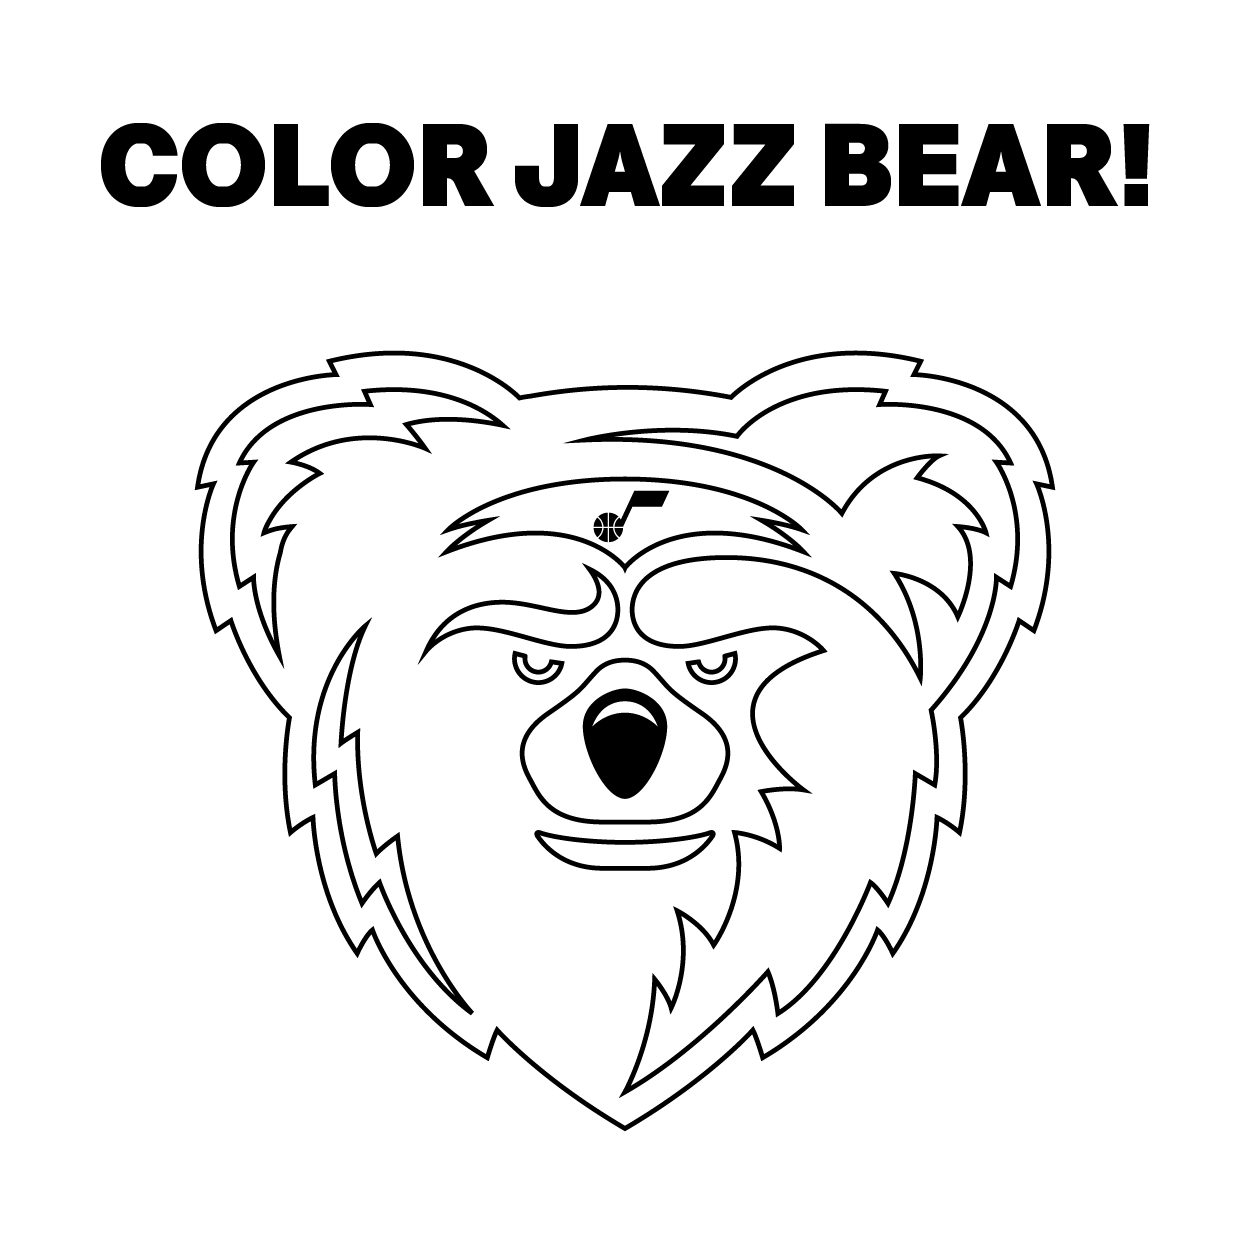 Coloring pagesactivities â utah jazz youth